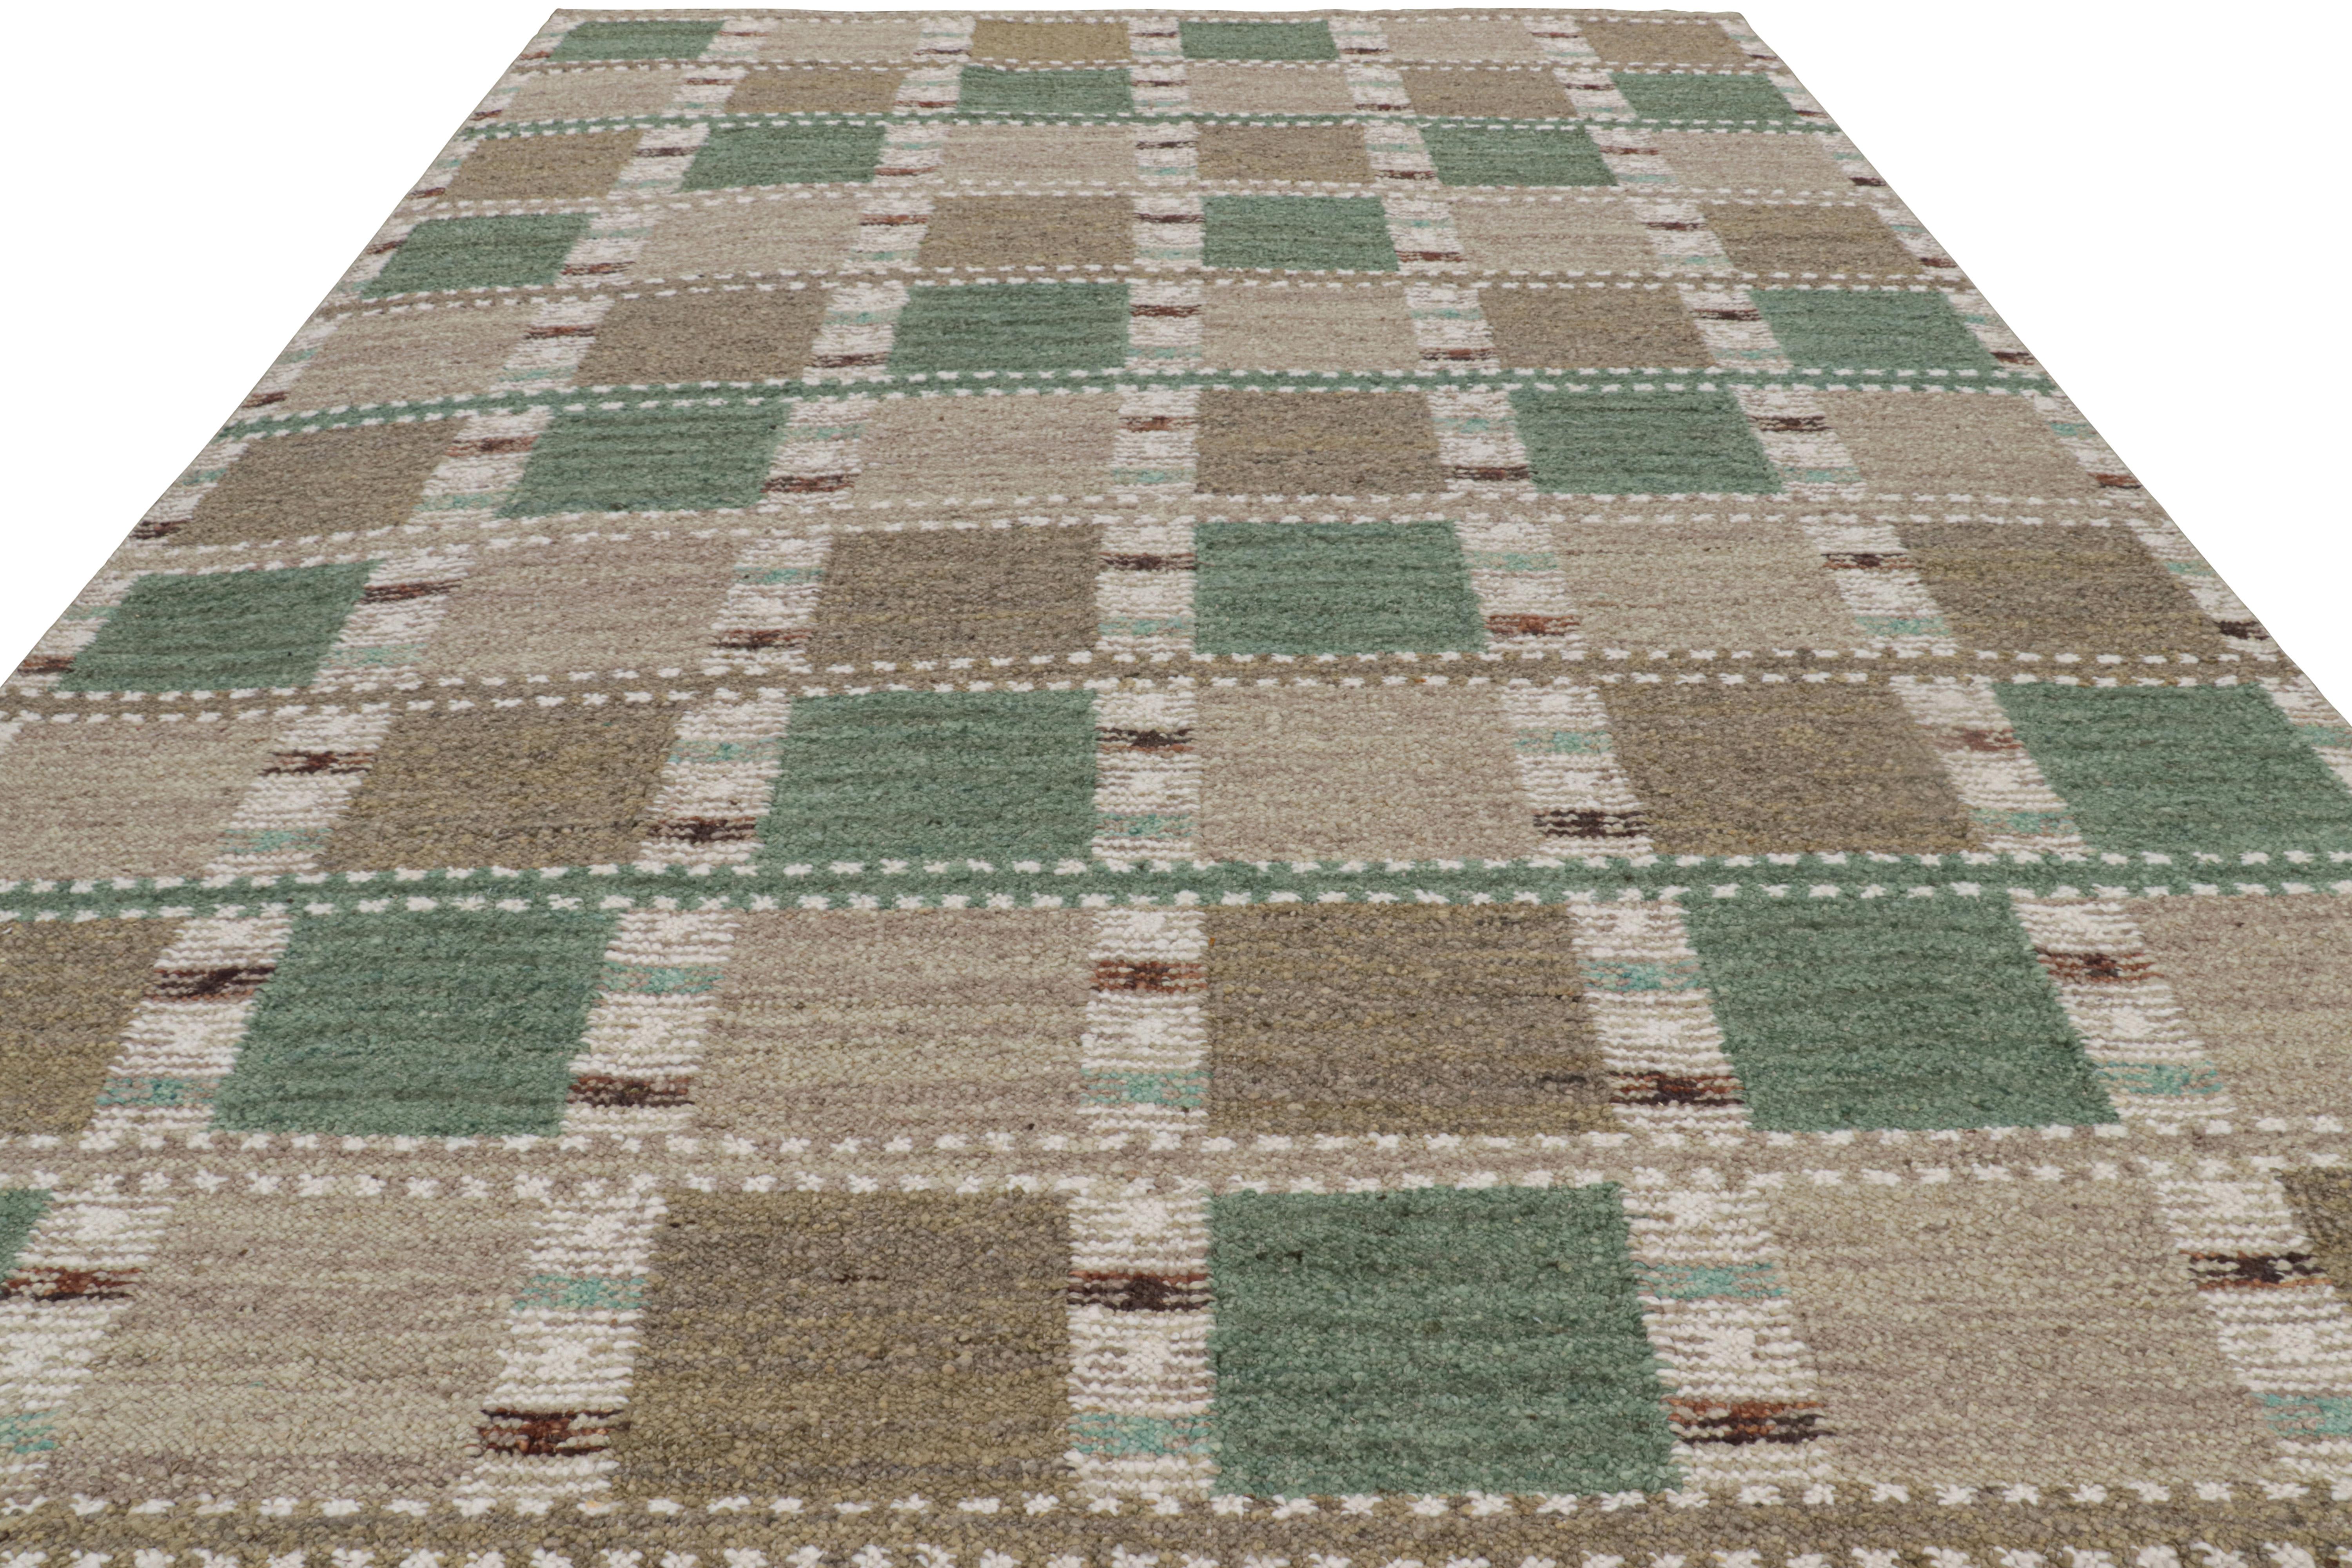 Hand-Woven Rug & Kilim’s Scandinavian Style Rug in Green and Beige-Brown with Patterns For Sale